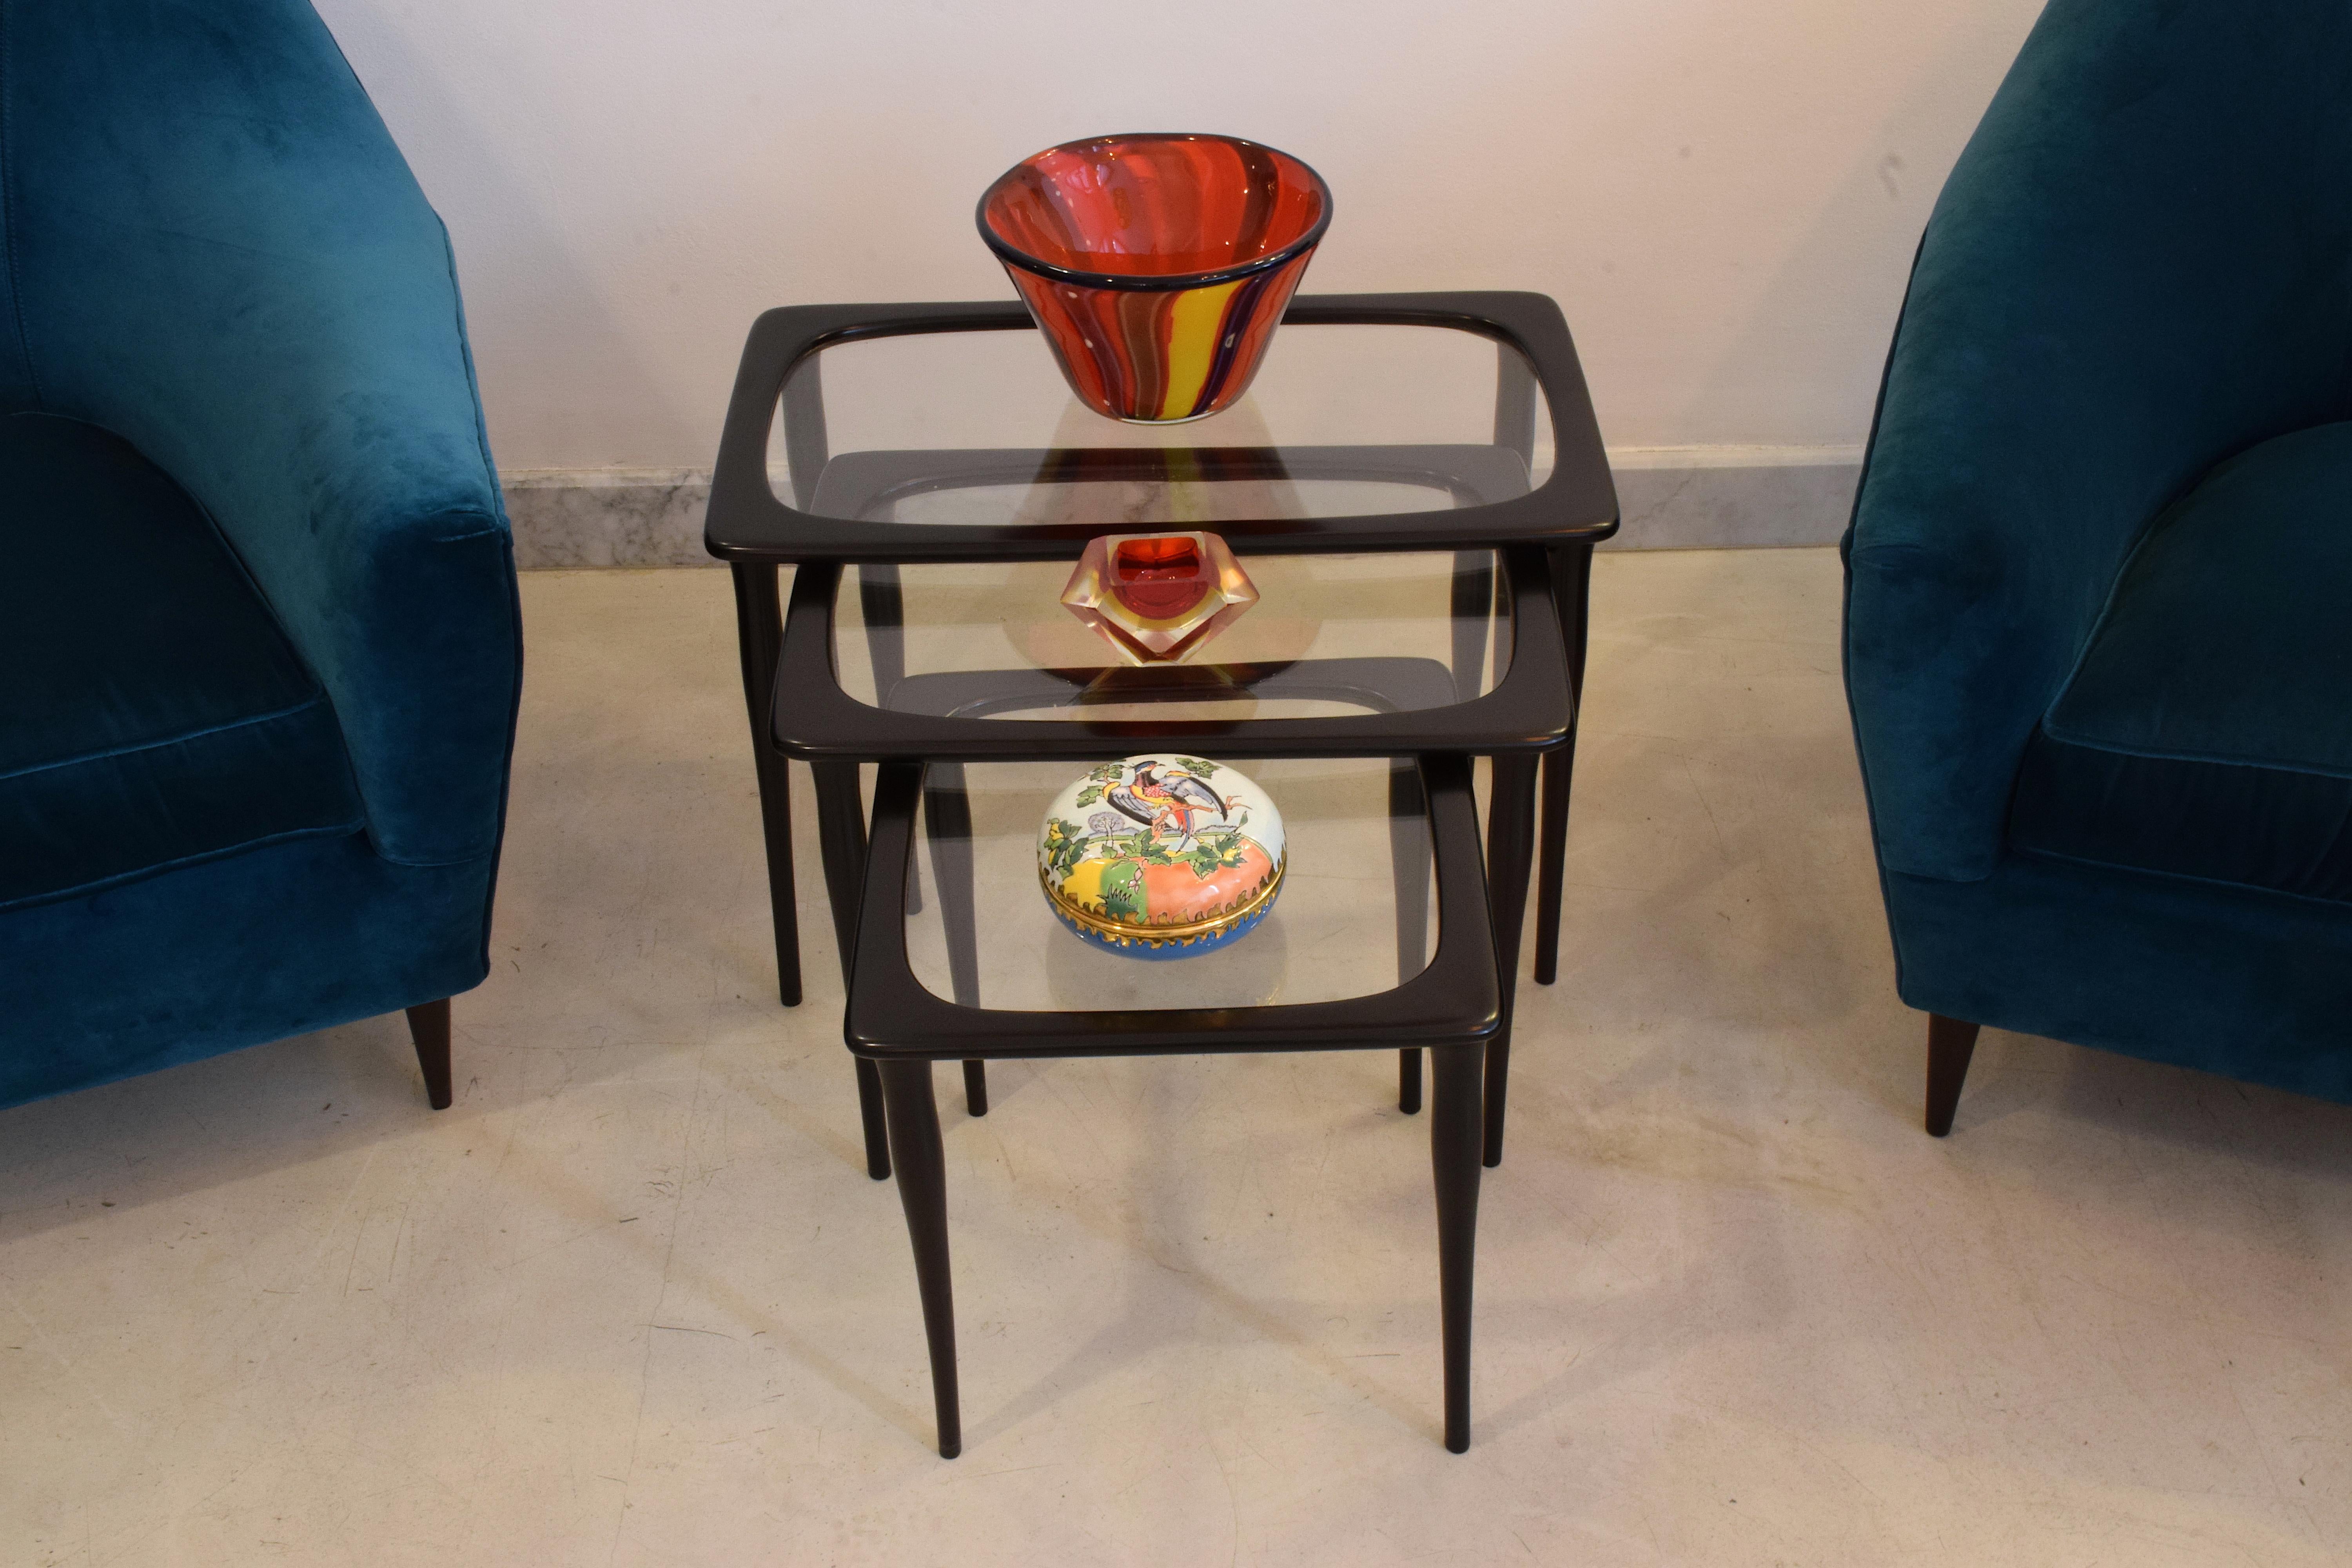 Three Italian Midcentury Nesting Tables by Ico Parisi, 1950s For Sale 2